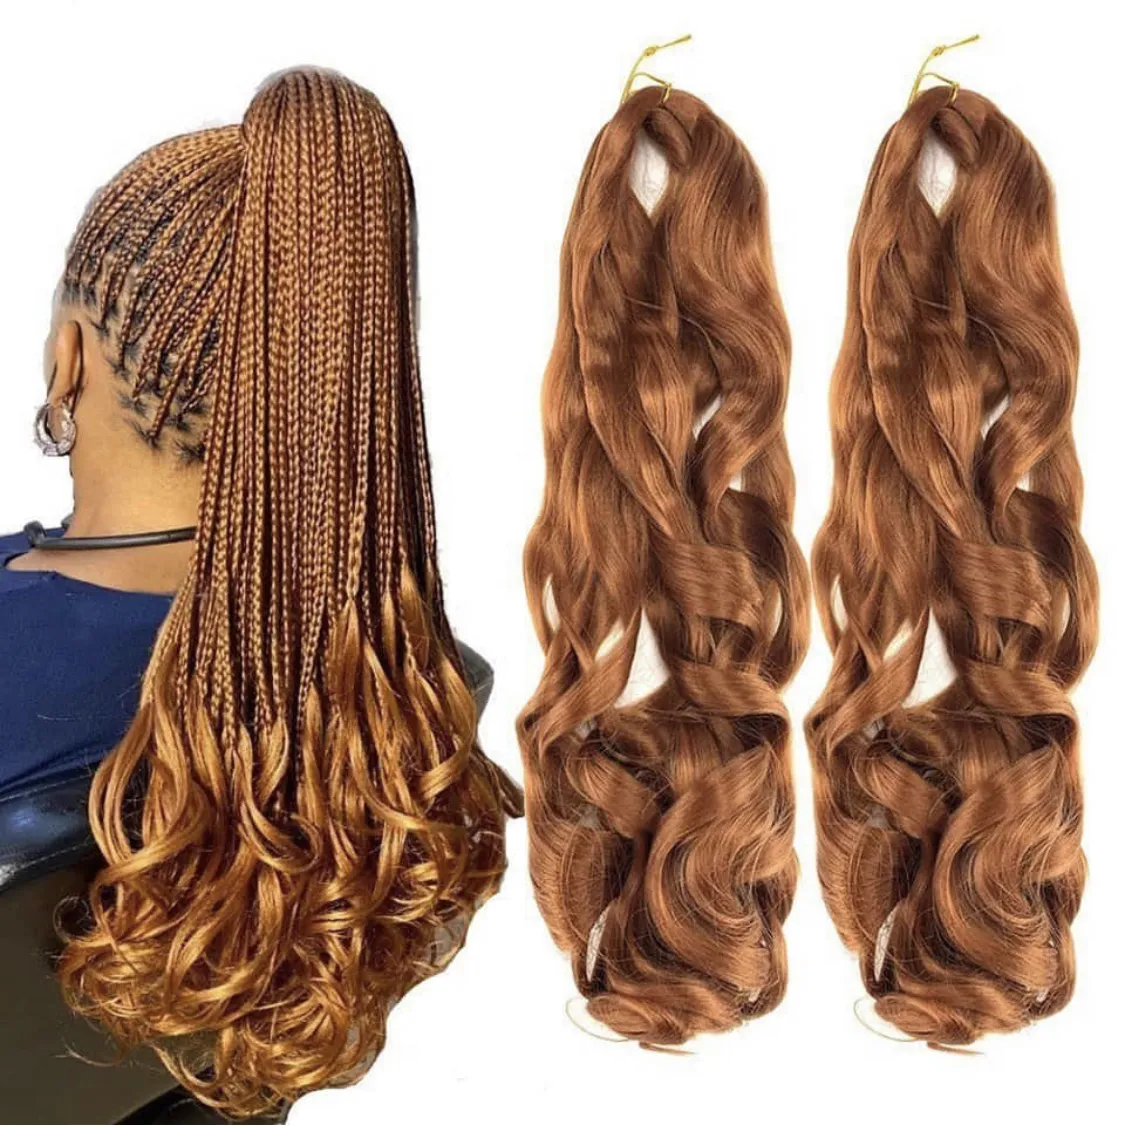 Wholesale New Custom 14 18 22inch French Curly Wavy Synthetic Braiding Hair Kenya 150g Pony Style Spiral Curly Braiding Hair